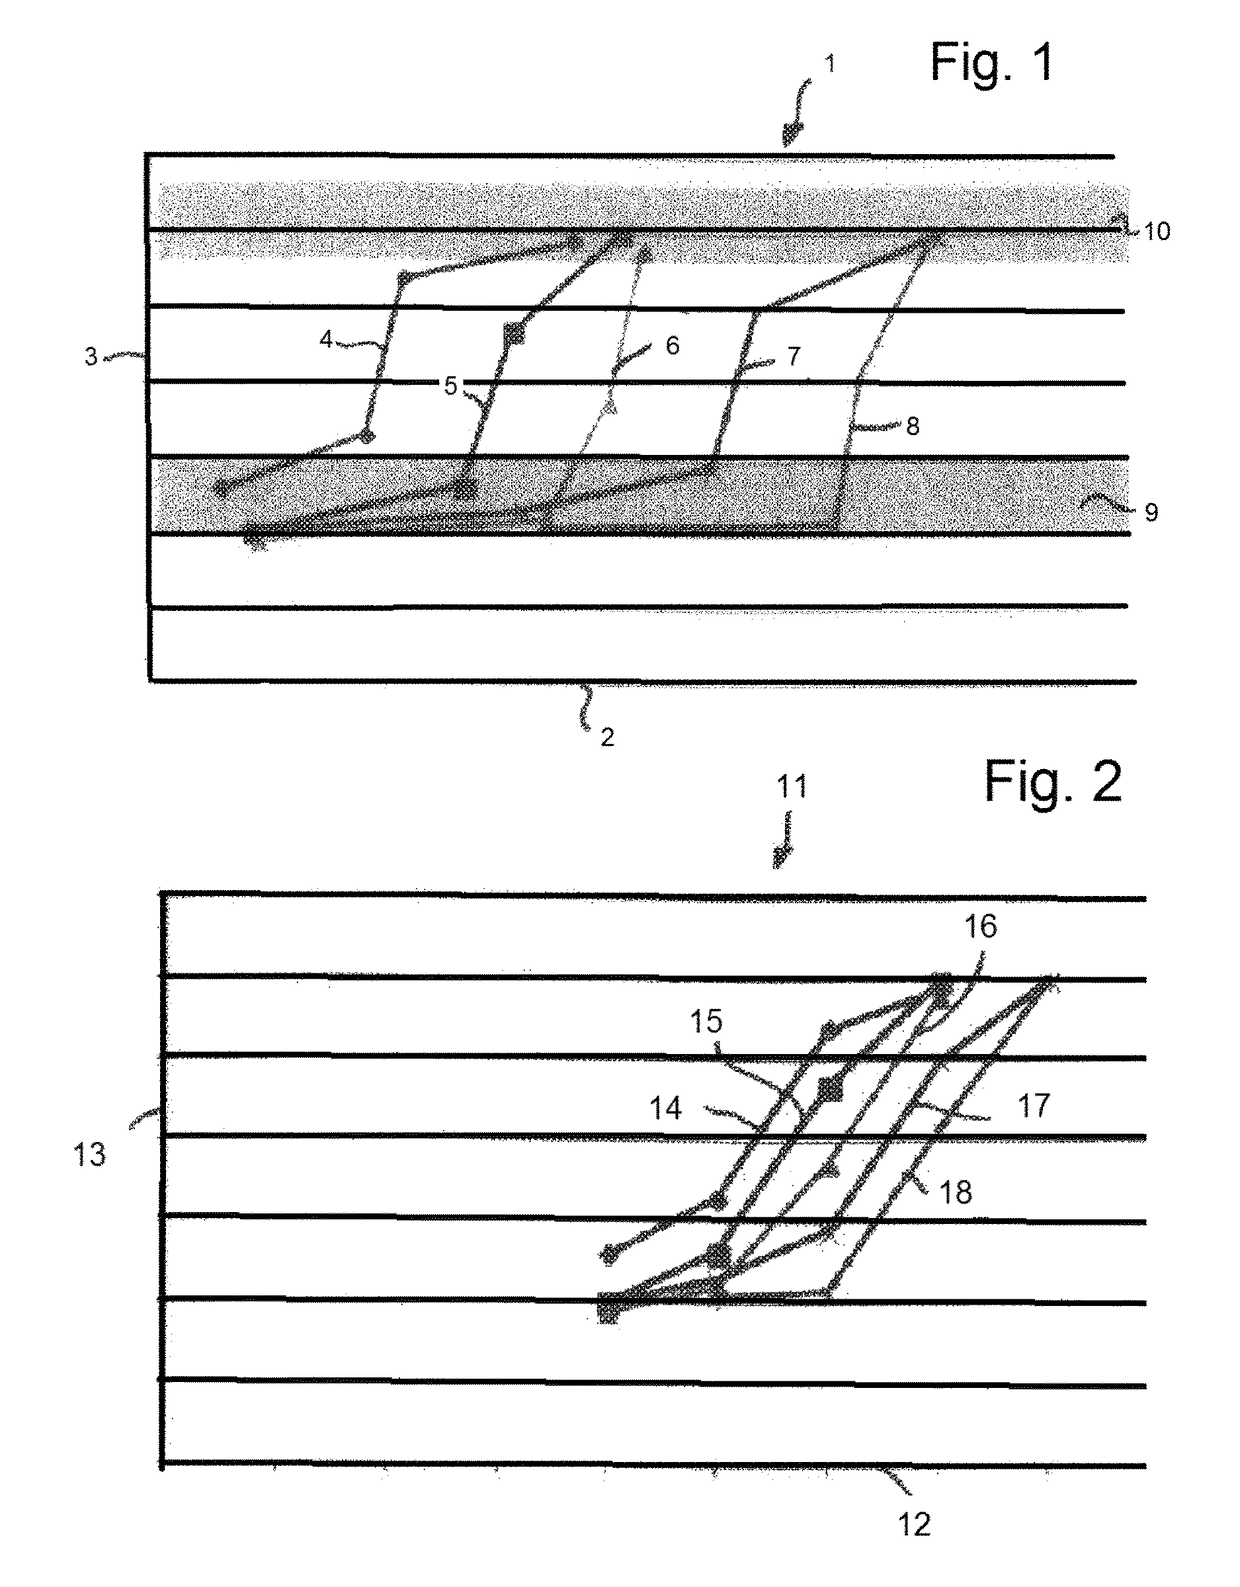 Method for controlling a fuel delivery system